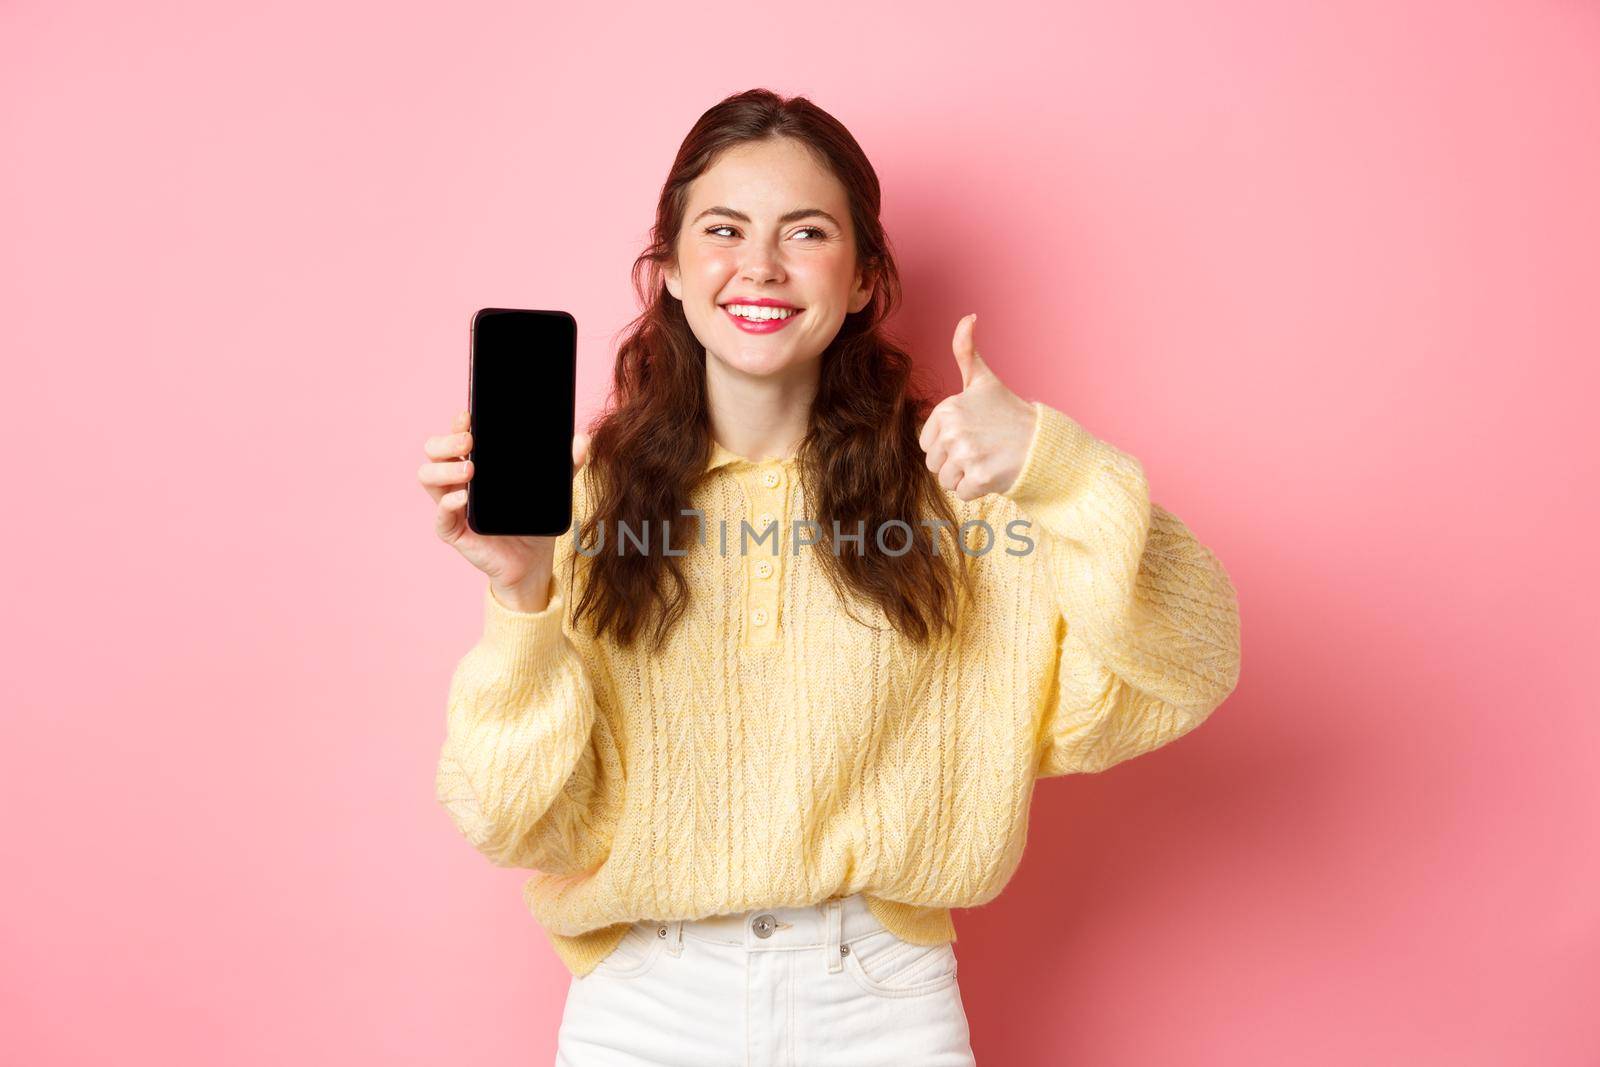 Image of beautiful woman laughing and looking aside, while rating an app, showing thumbs up and empty phone screen, recommending online promo, standing against pink background.